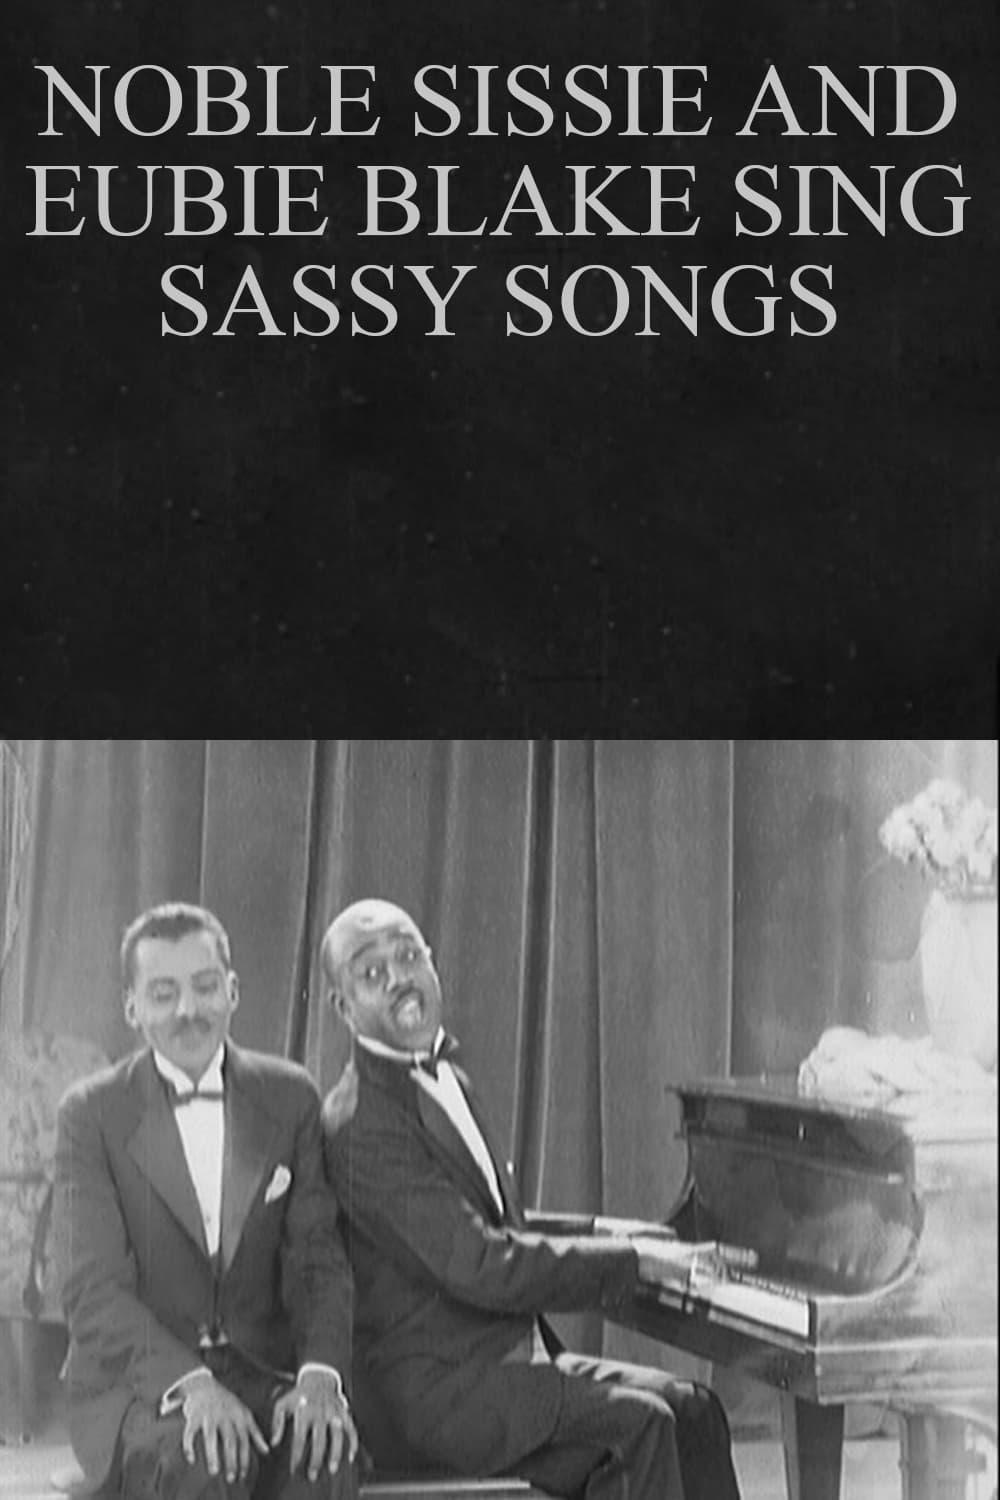 Noble Sissle and Eubie Blake Sing Snappy Songs poster